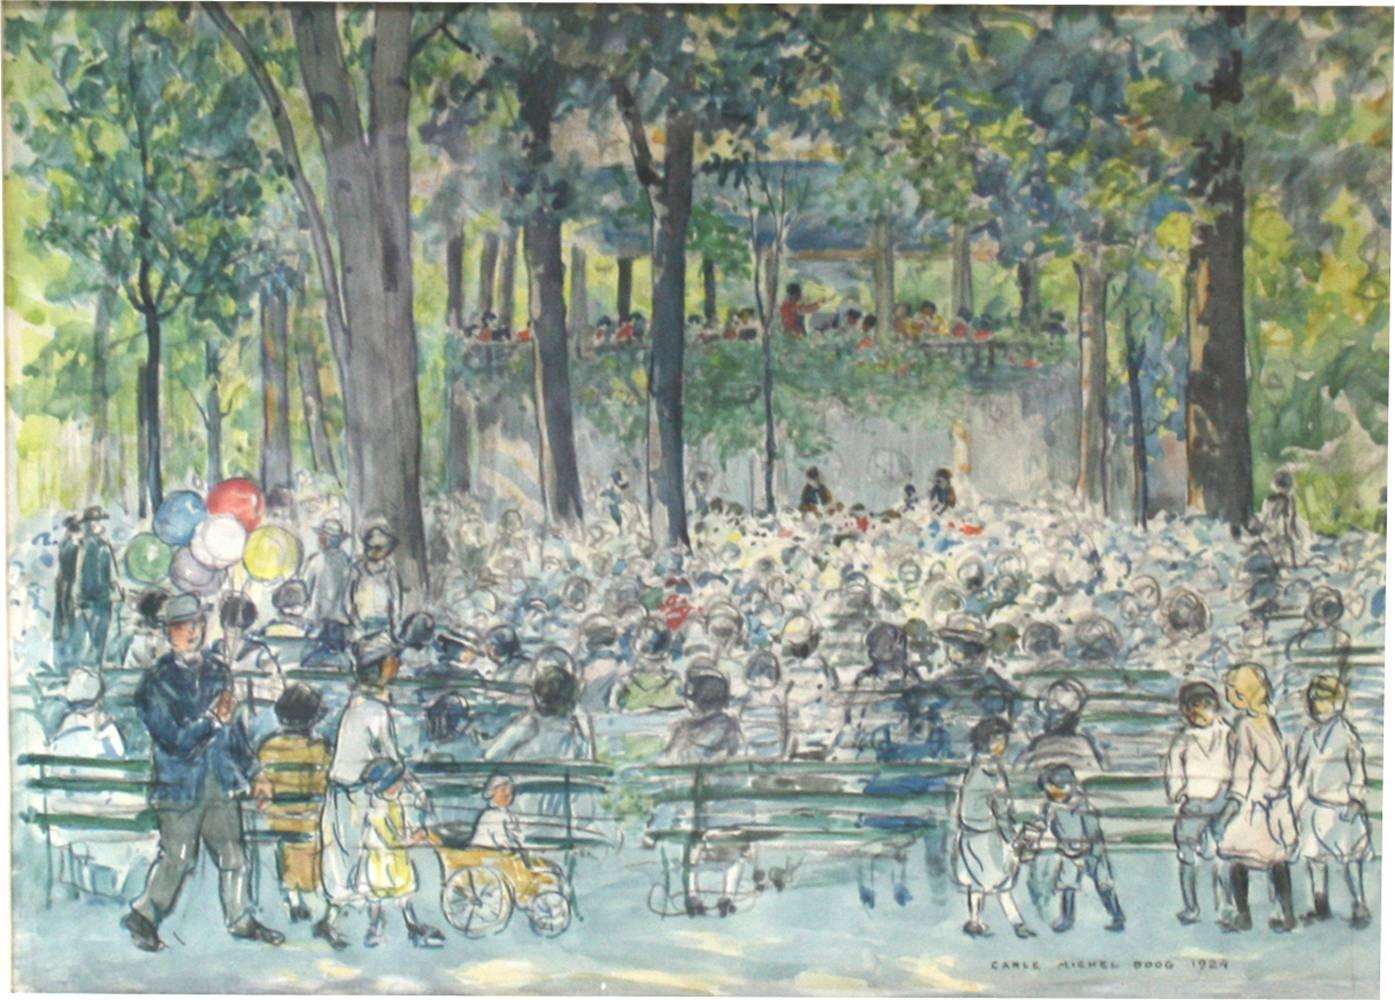 This beautiful watercolor depicts a scene from 1924, of a concert in Central Park. Translucent colors of greens and blues depict the conductor and his band performing in the Central Park band stand for a variety of listeners. A man at the lower left